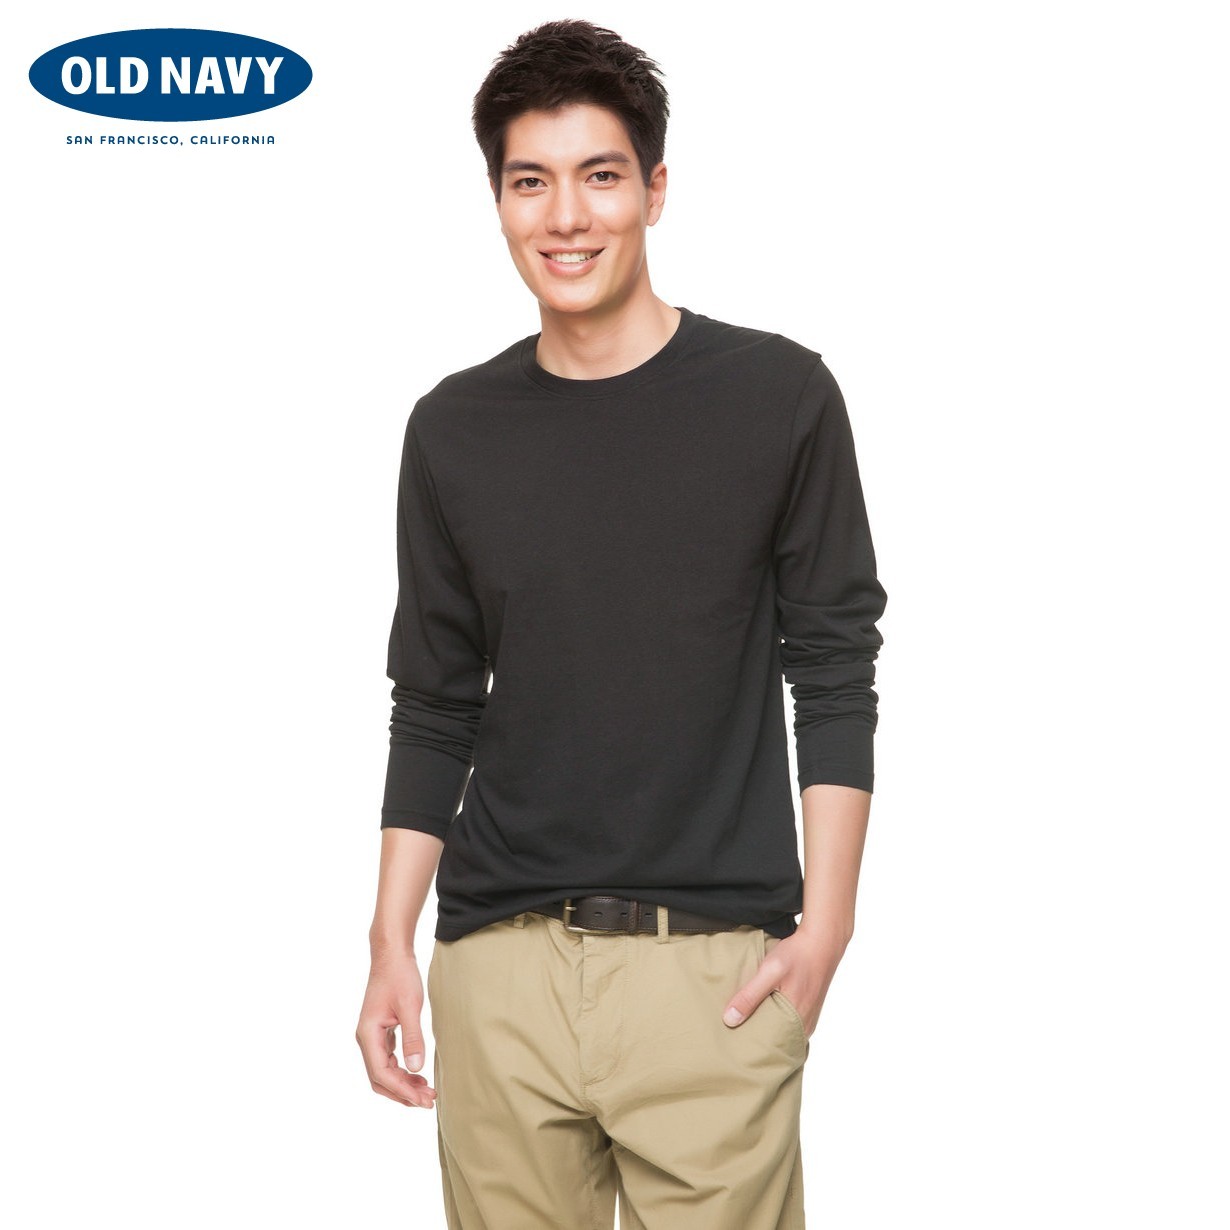   OLD NAVY